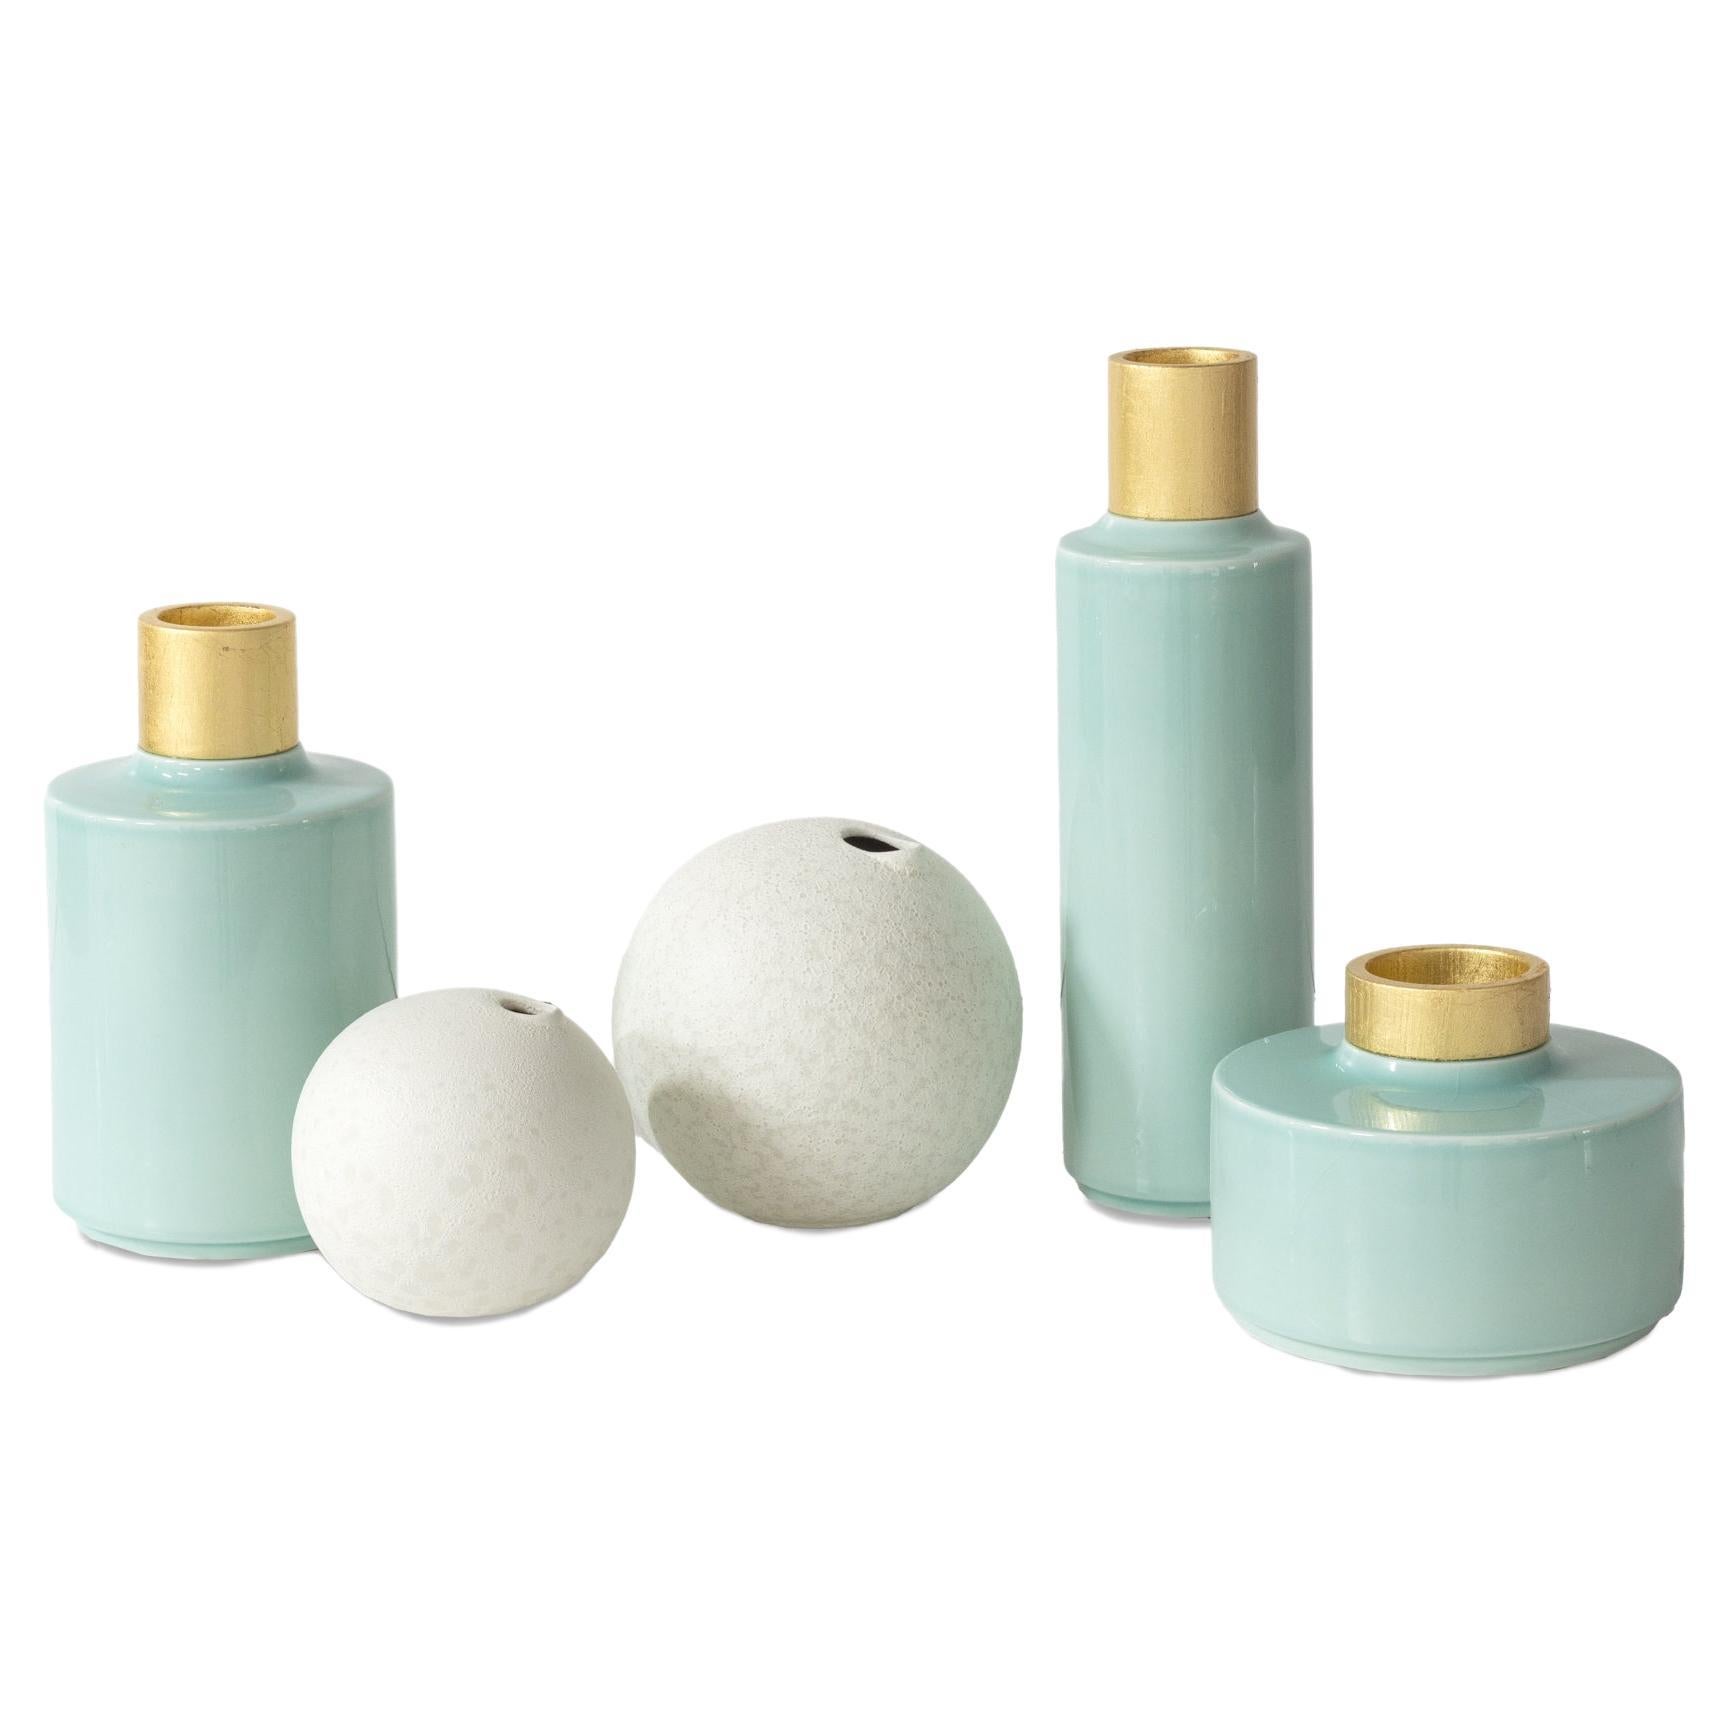 Set/5 Ceramic Jars, Mint-Green & White, Handmade in Portugal by Lusitanus Home For Sale